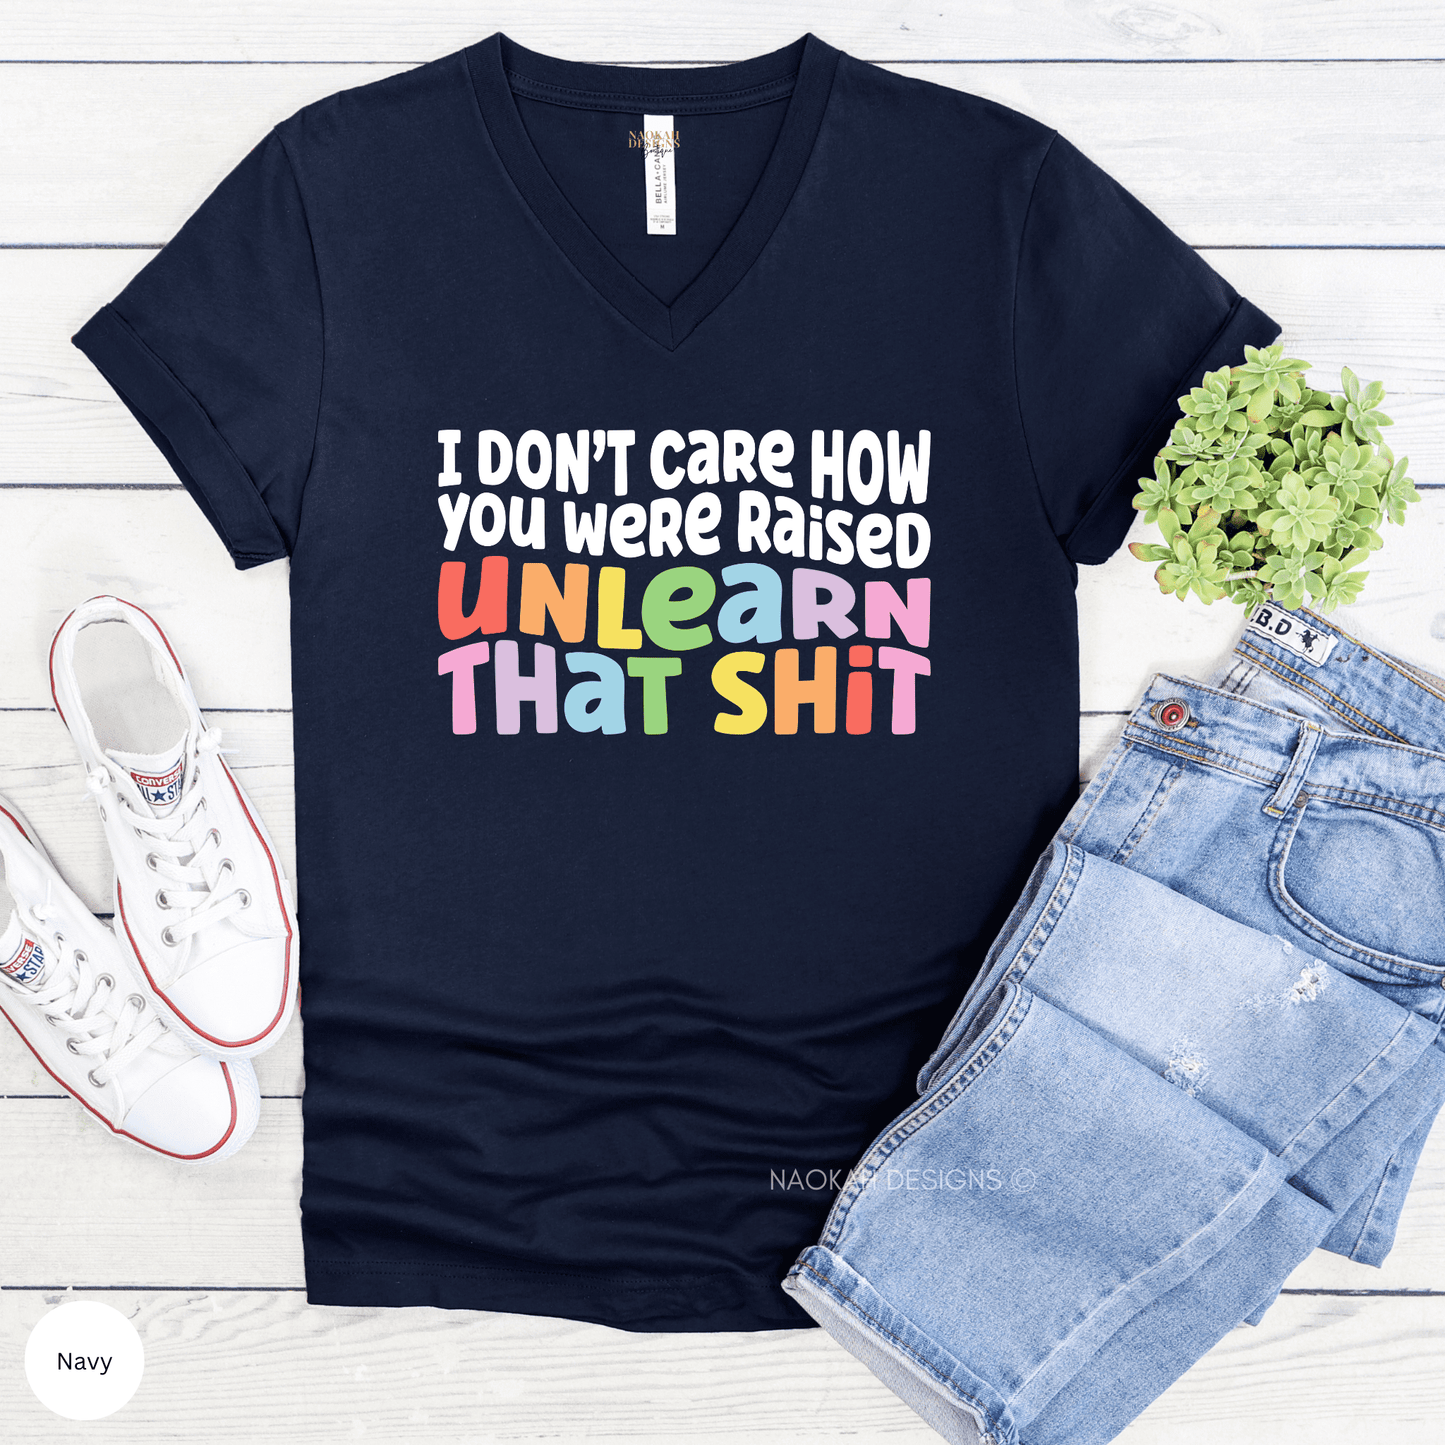 i don't care how you were raised unlearn that shit shirt, human rights, pride shirt, trans pride, equal rights, rainbow pride shirt, indigenous heritage month, indigenous history month, indigenous owned shop, indigenous peoples day shirt